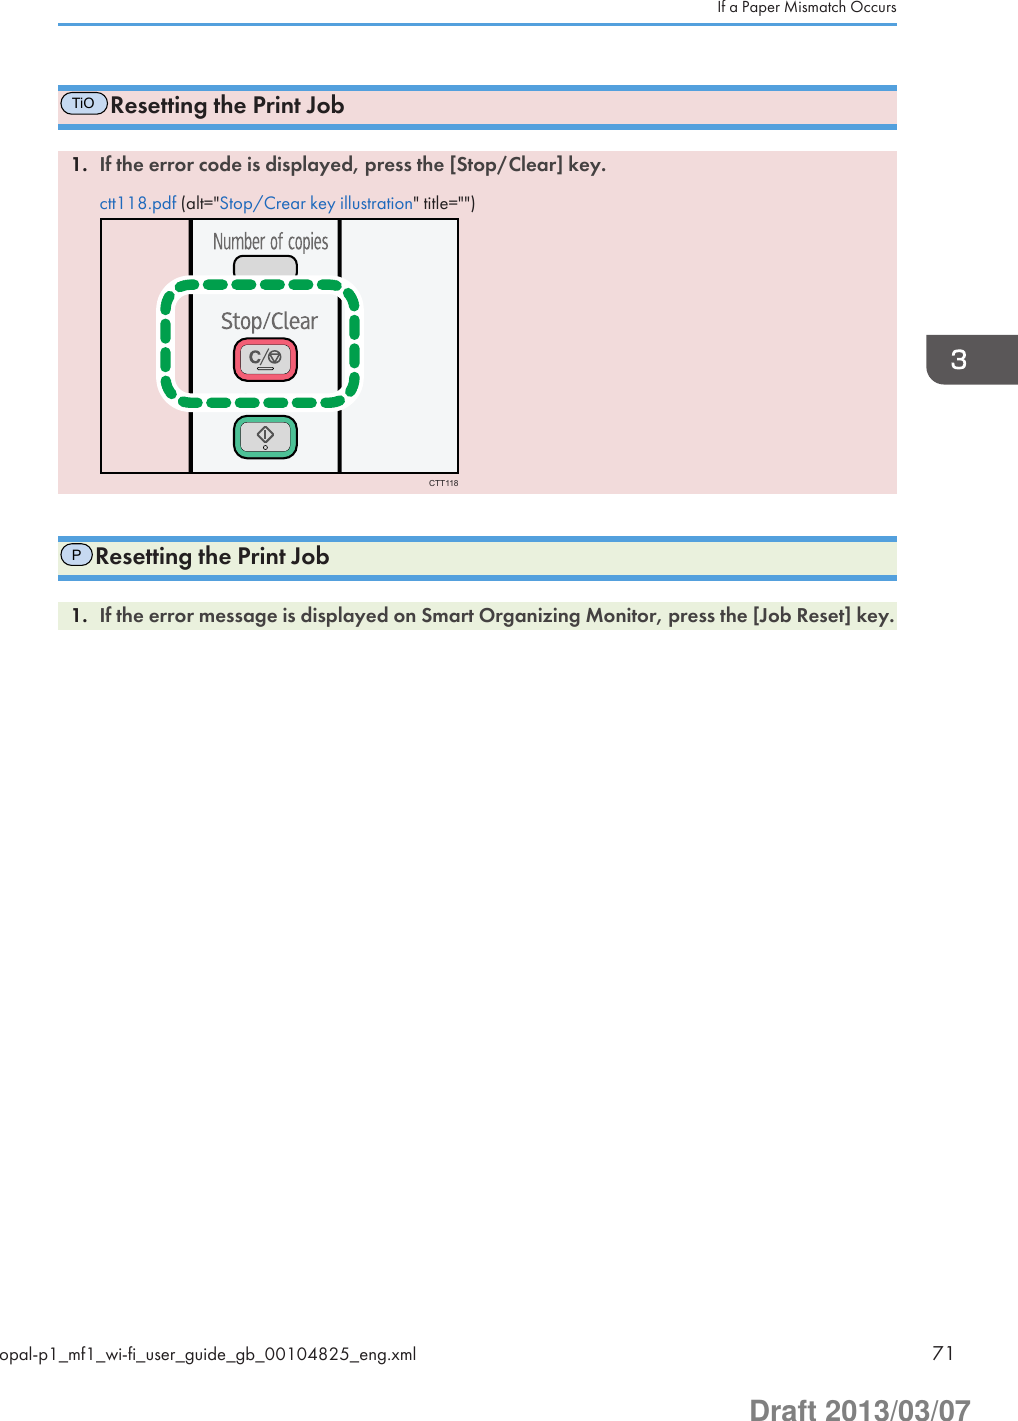 TiOResetting the Print Job1. If the error code is displayed, press the [Stop/Clear] key.ctt118.pdf (alt=&quot;Stop/Crear key illustration&quot; title=&quot;&quot;)CTT118PResetting the Print Job1. If the error message is displayed on Smart Organizing Monitor, press the [Job Reset] key.If a Paper Mismatch Occursopal-p1_mf1_wi-fi_user_guide_gb_00104825_eng.xml 71Draft 2013/03/07